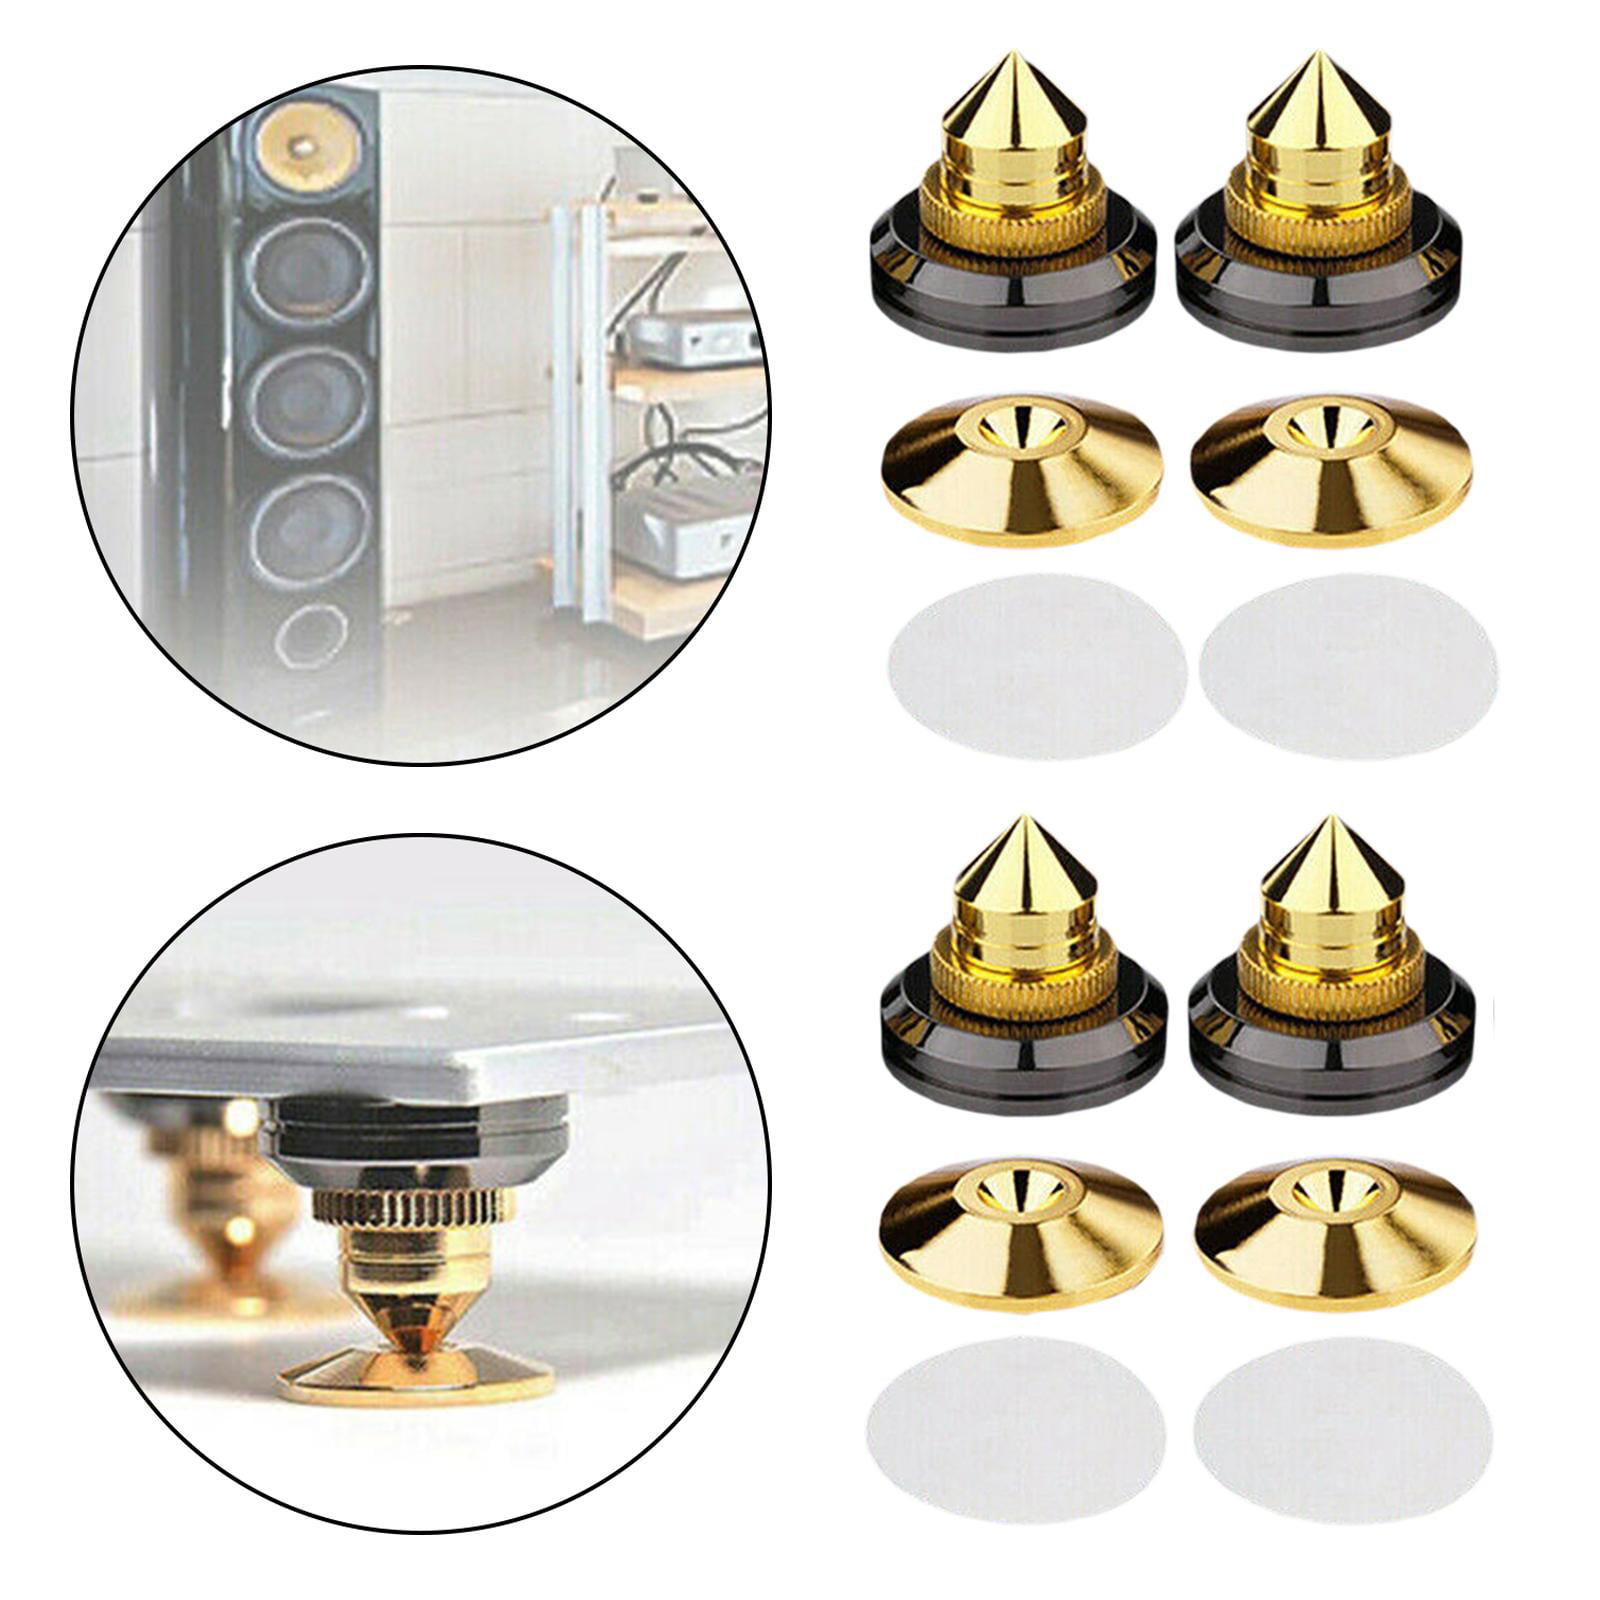 8 Pairs Copper Speaker Spikes Base Pad Feet Mat Speaker Subwoofer Suspension Spikes Isolation Stand 